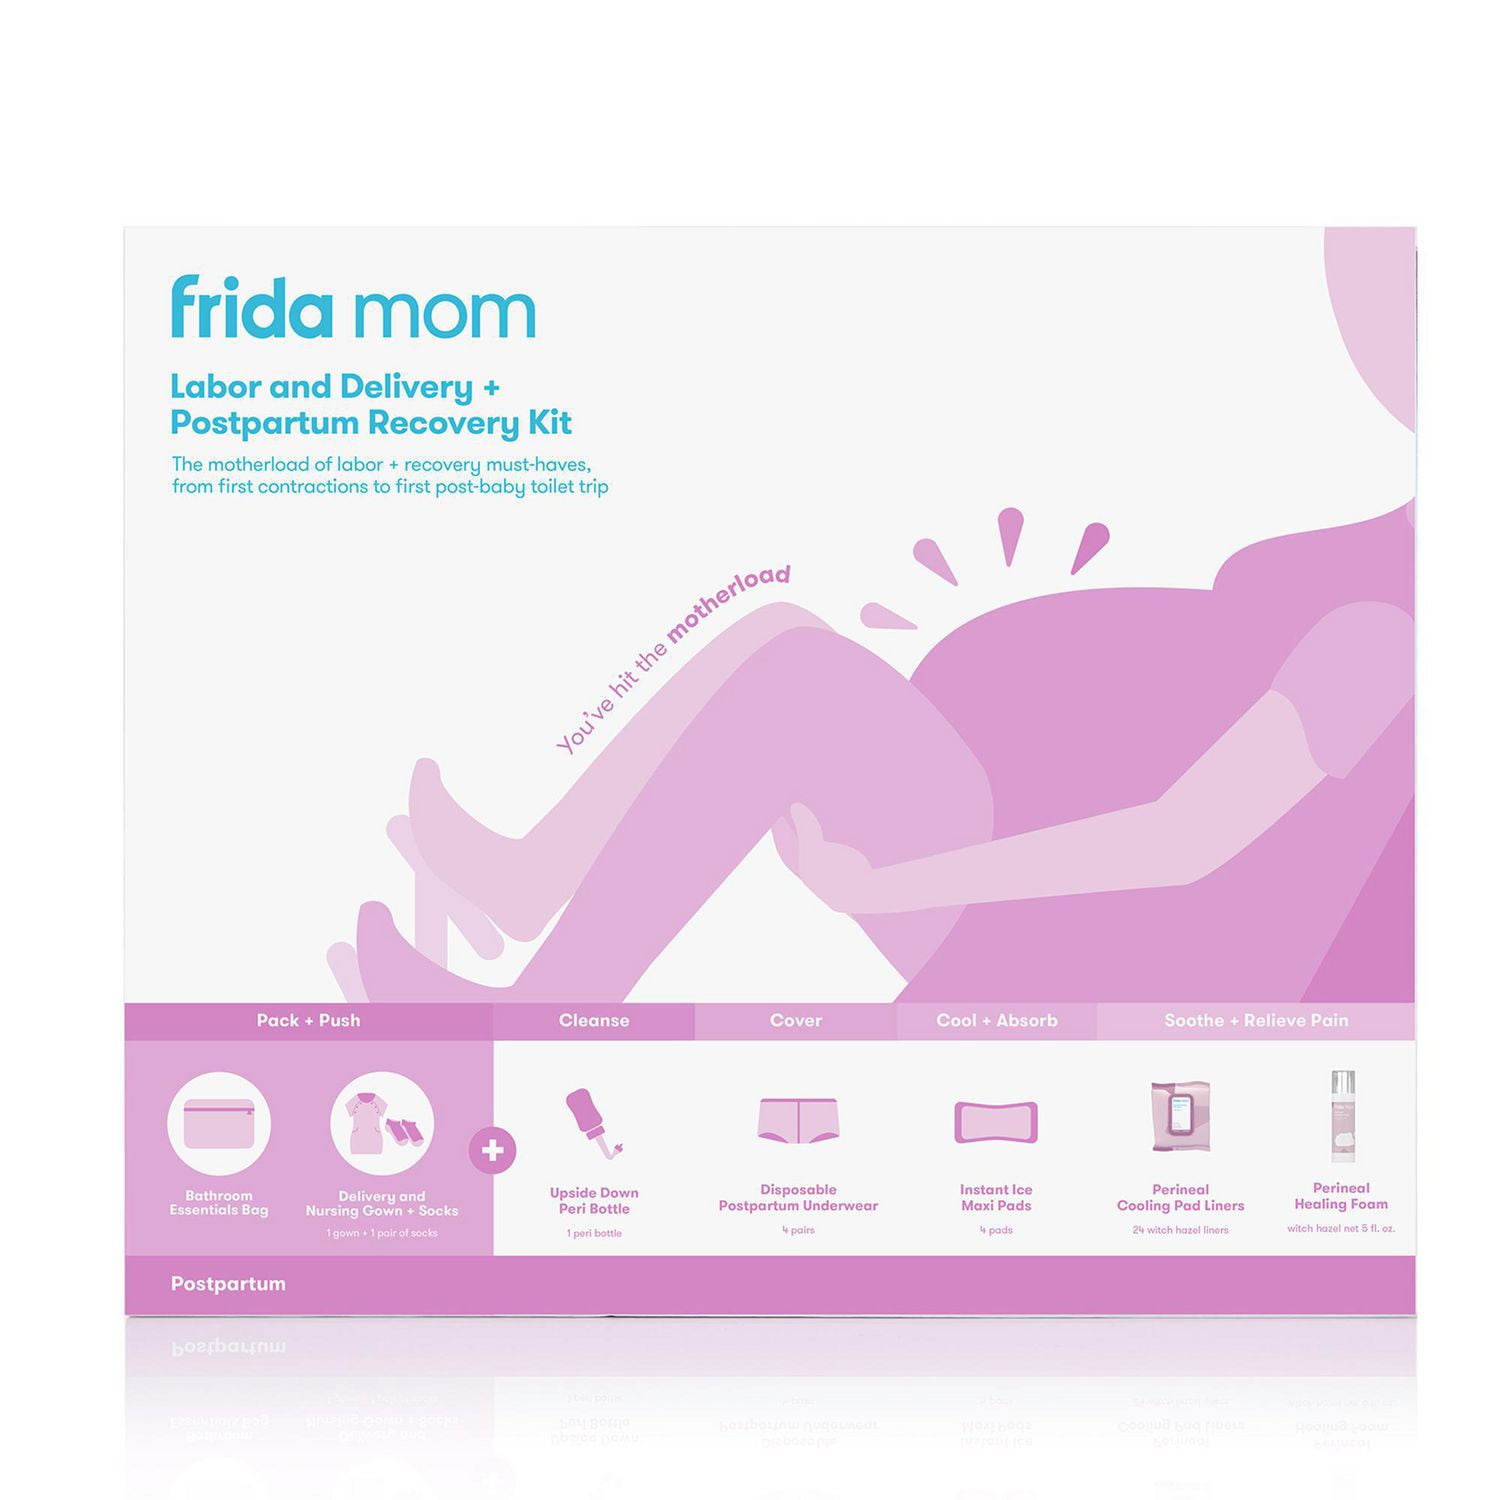 Frida Mom Witch Hazel Perineal Cooling Pad Liners - Active Baby Canadian  Online Baby Store